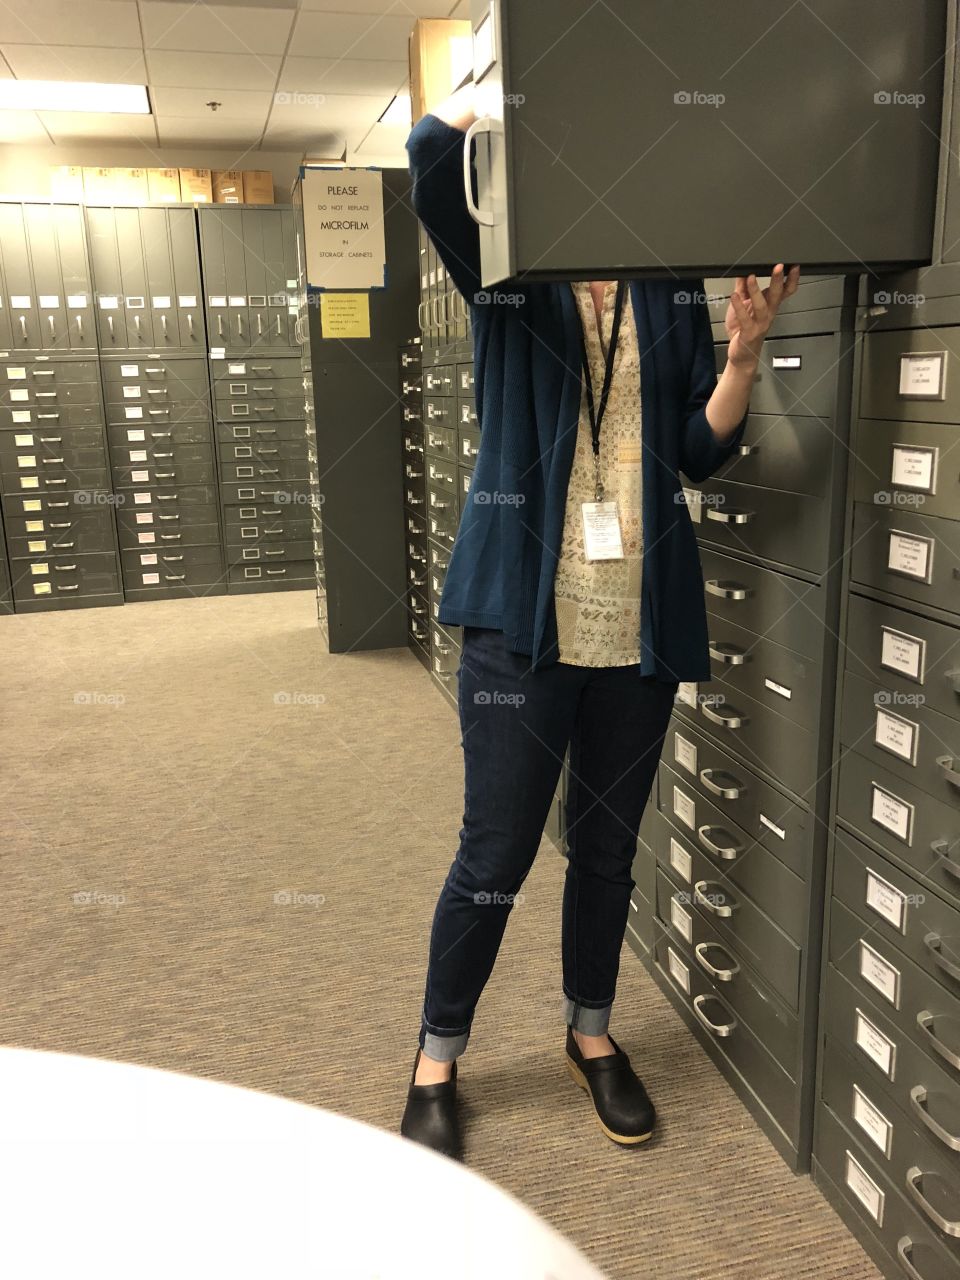 Archivist helping with genealogy search